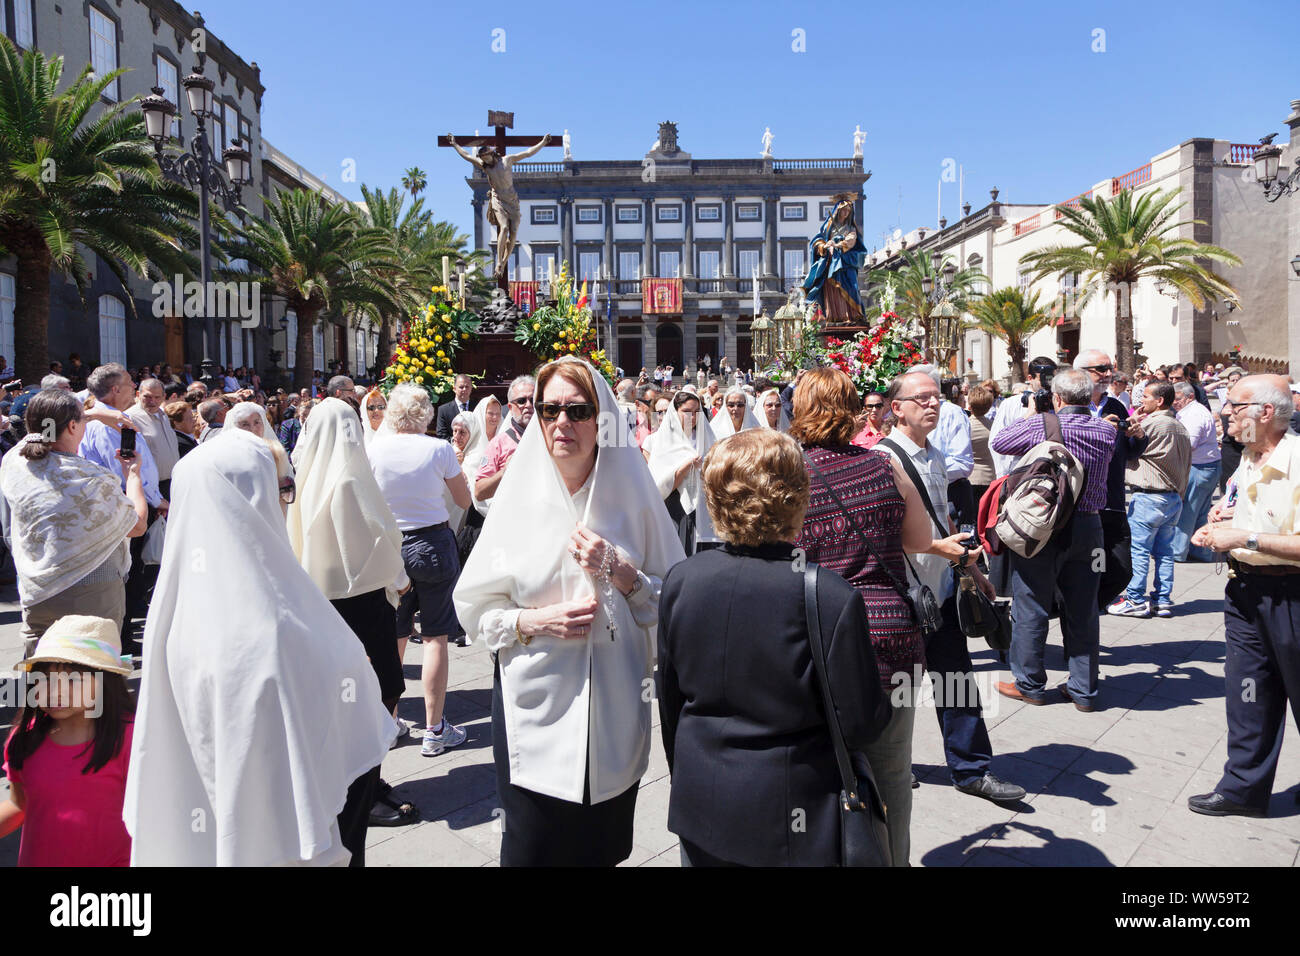 Easter procession in the old town Vegueta, UNESCO world cultural heritage, Las Palmas, Gran Canaria, Canary Islands, Spain Stock Photo